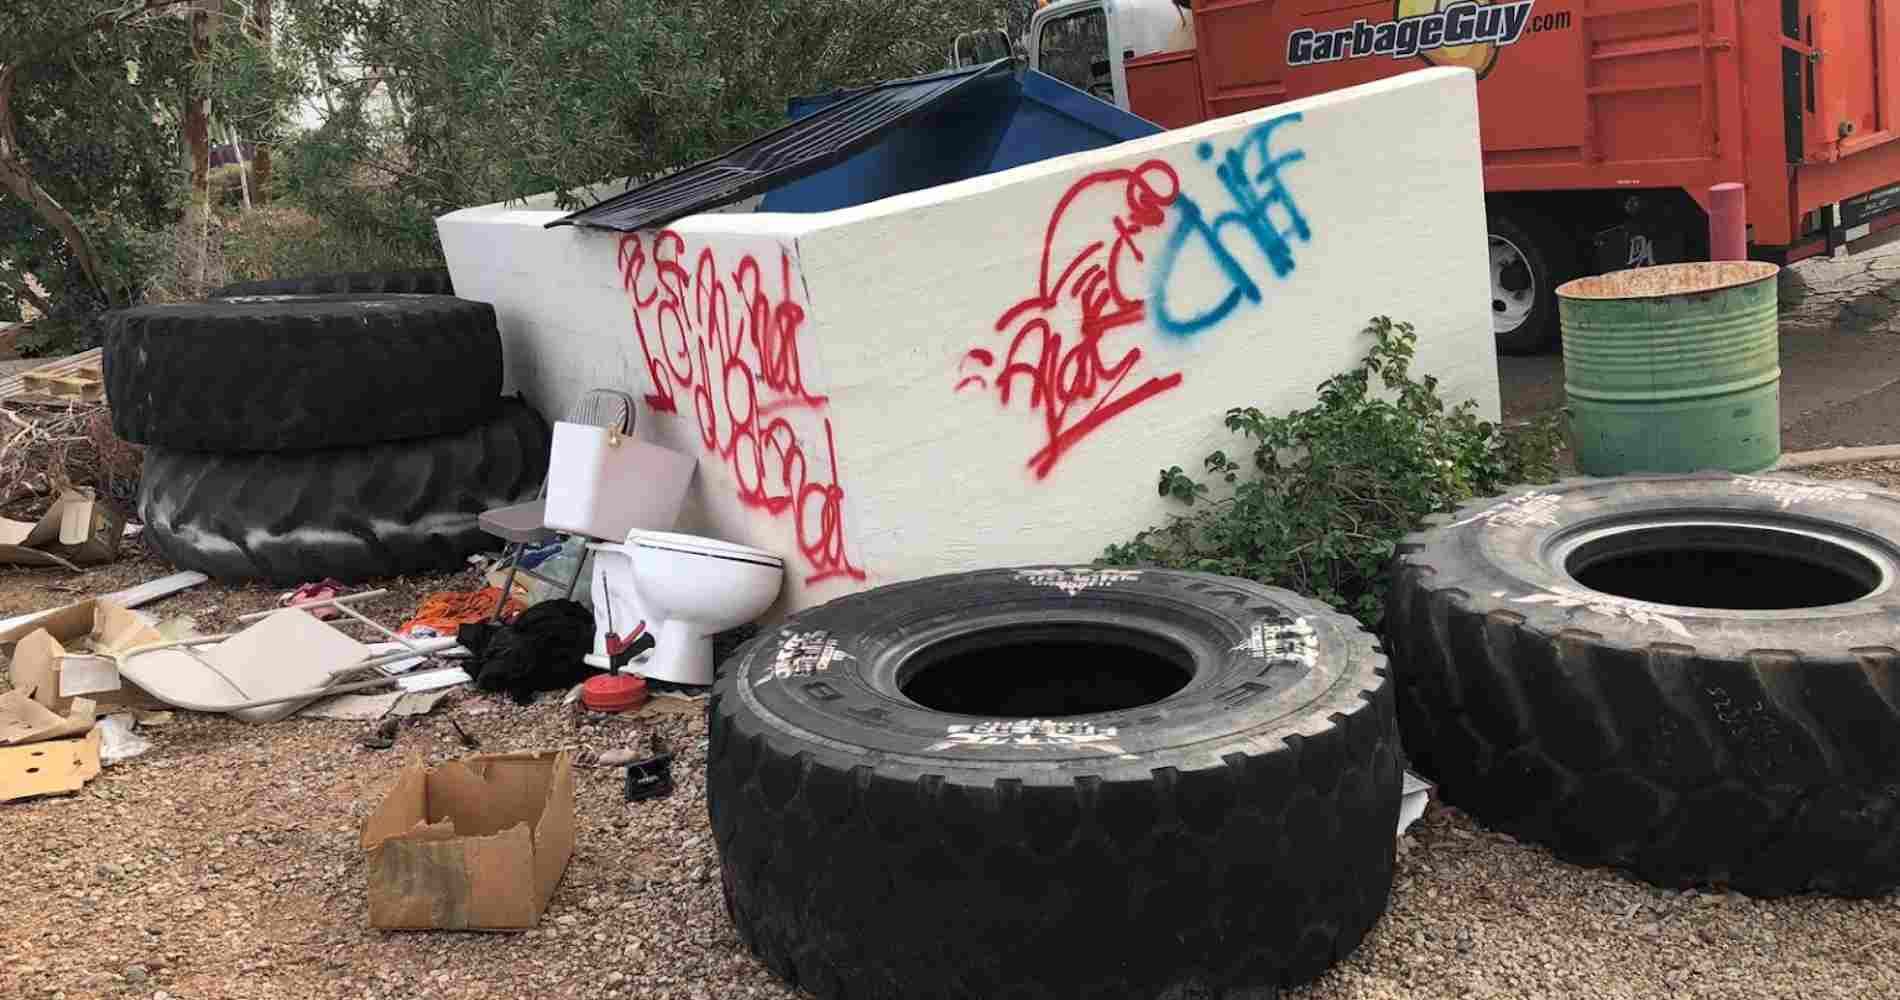 #1 for Tire Disposal in Tempe, AZ with Over 1200 5-Star Reviews!